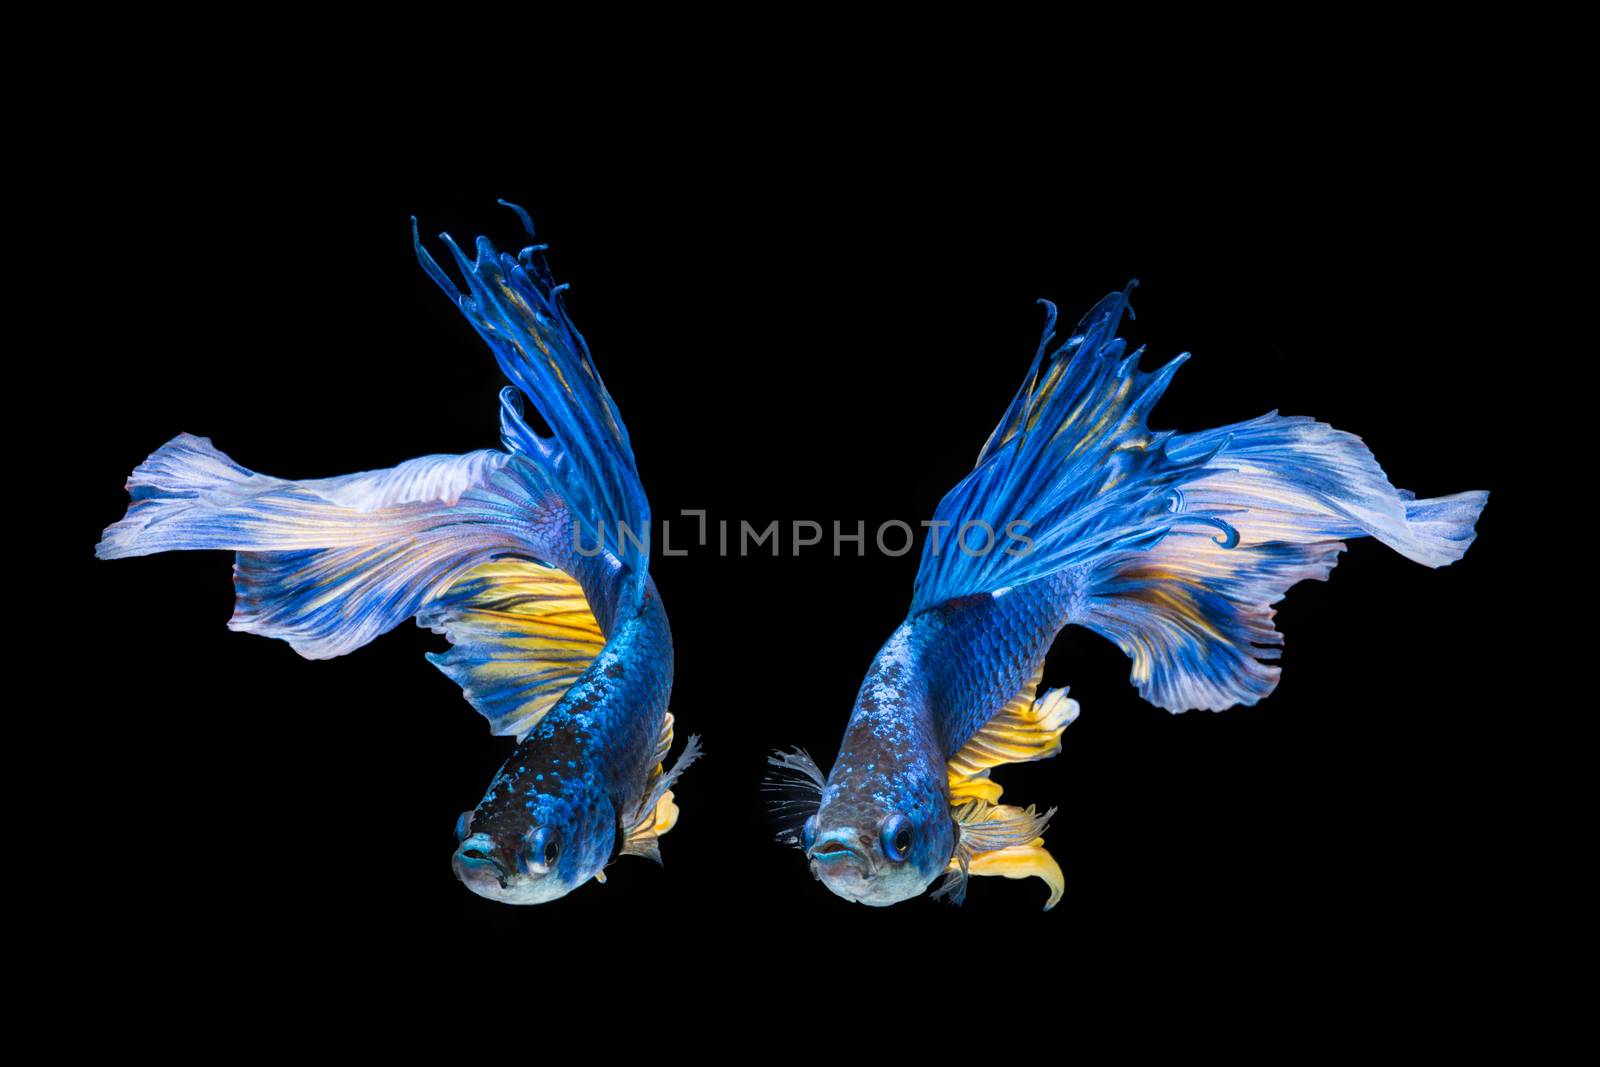 Blue and yellow betta fish by yuiyuize